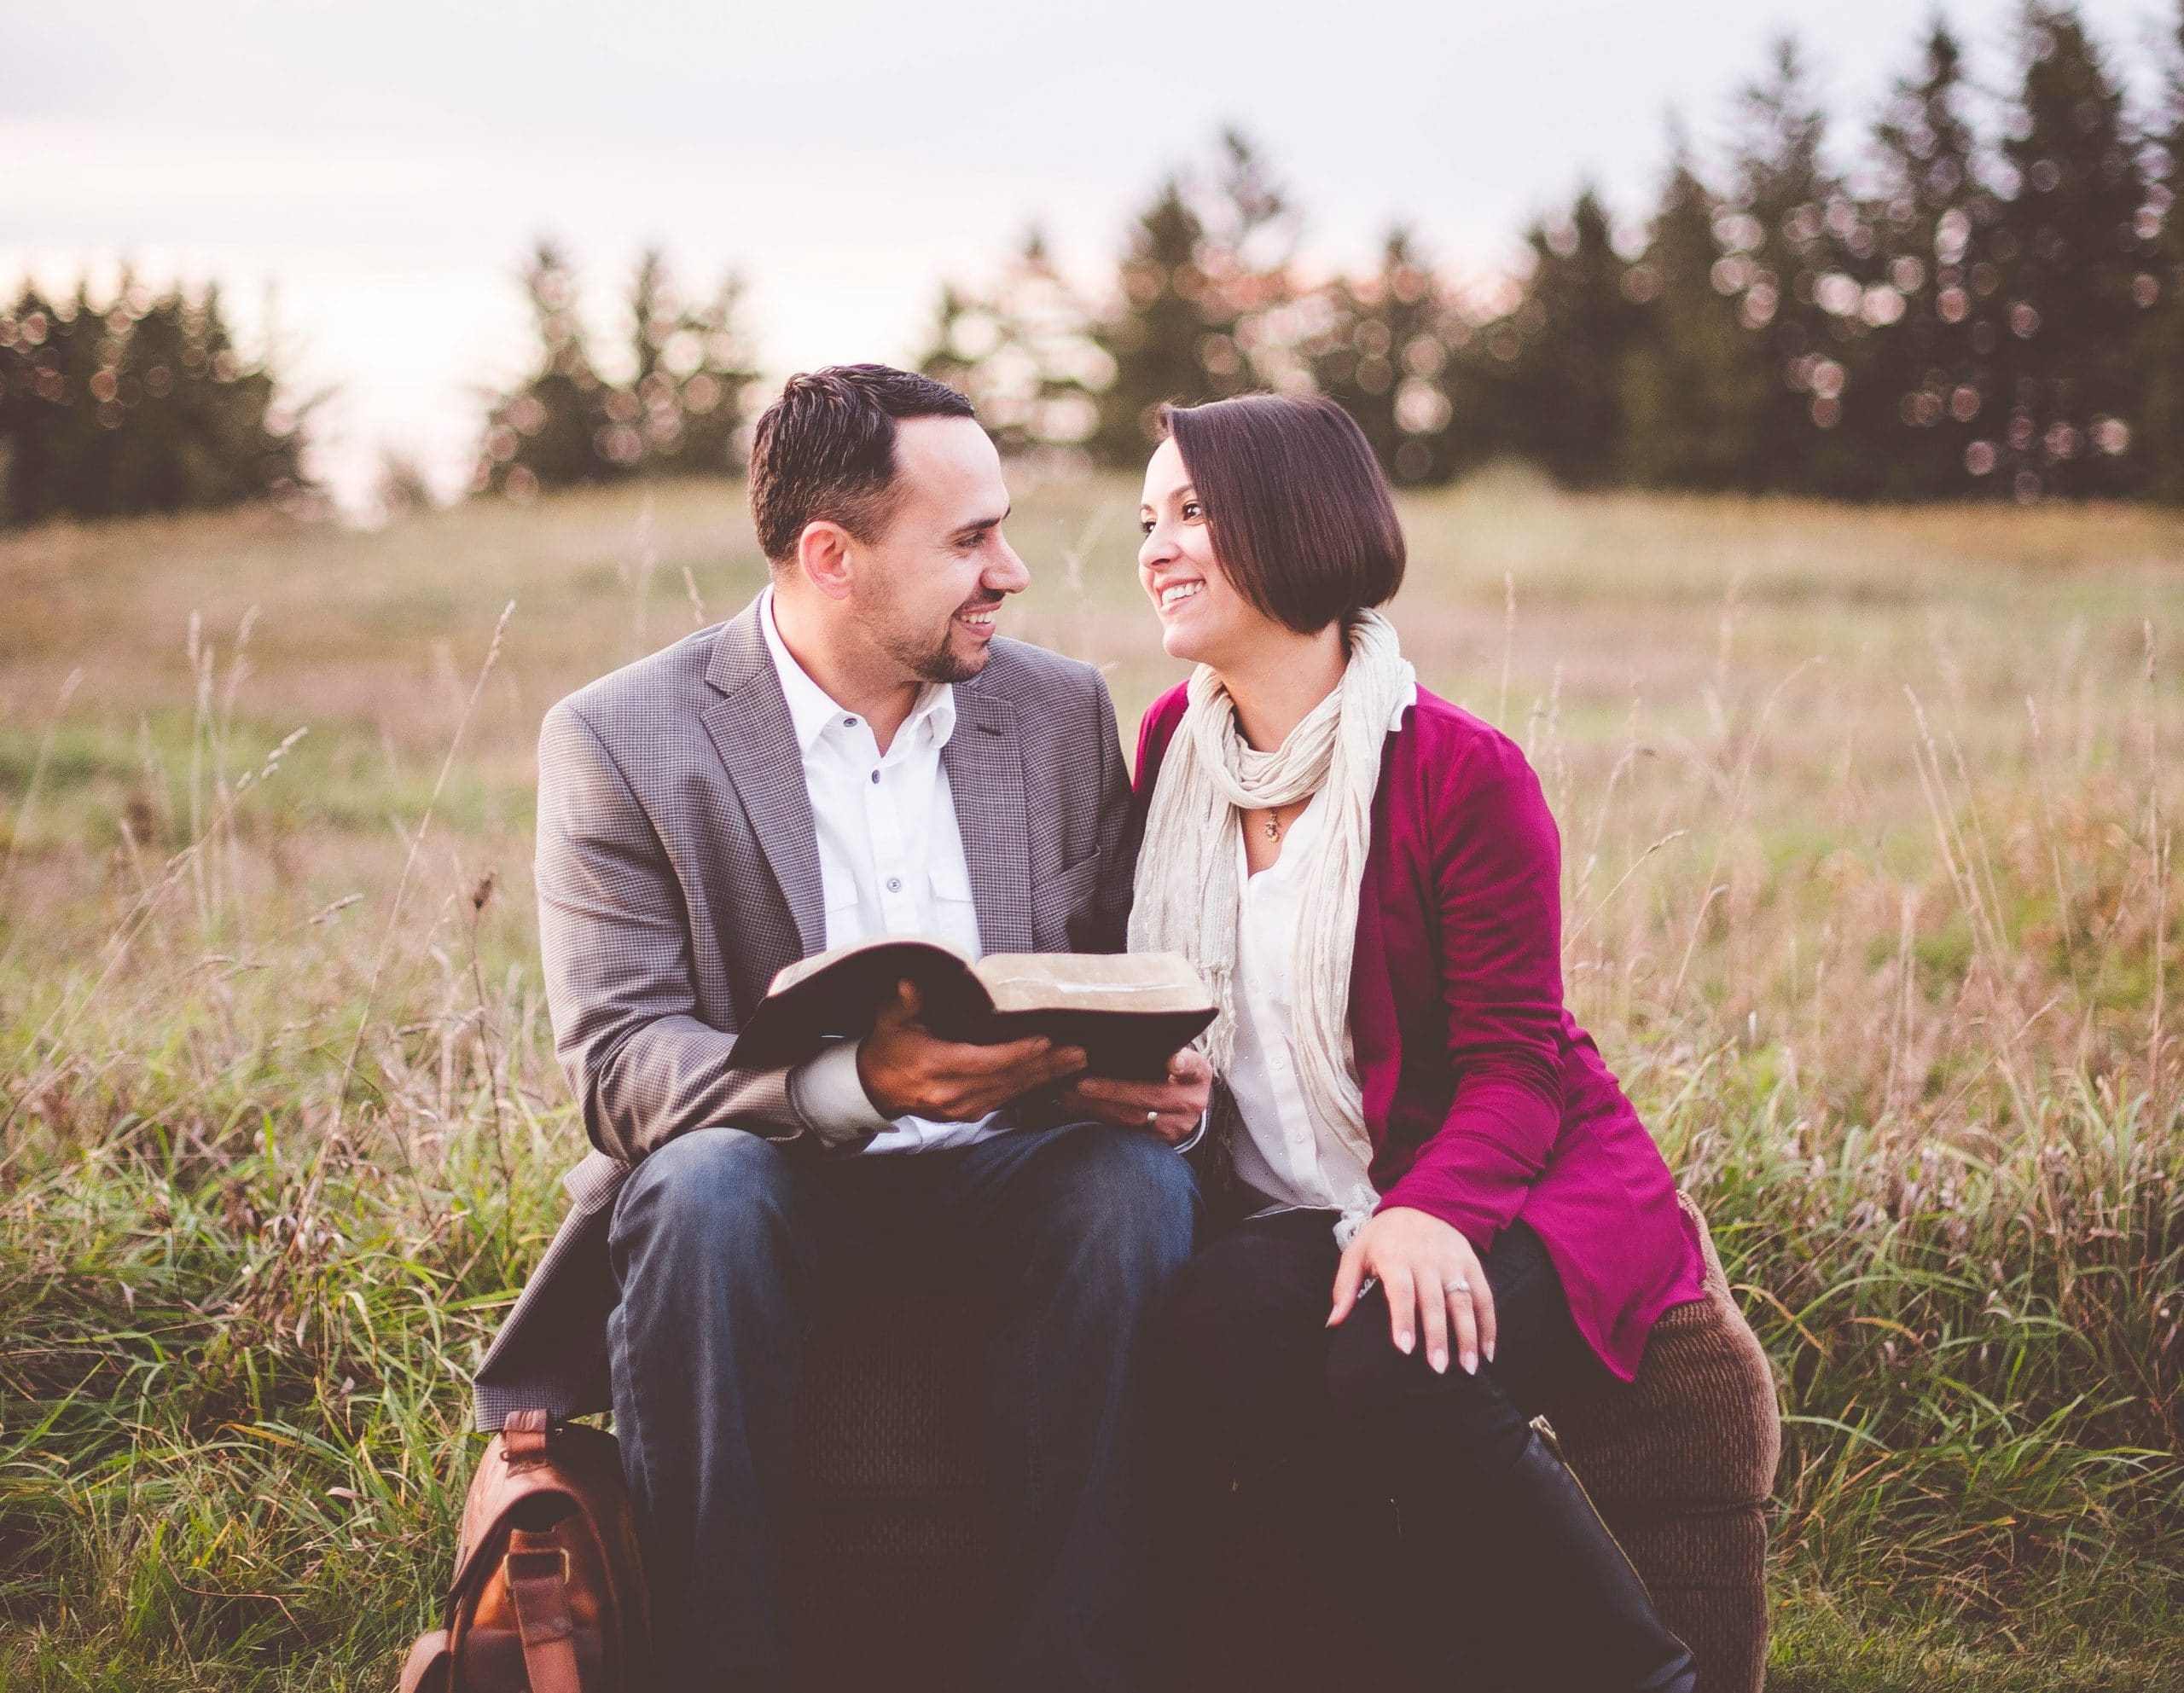 Scripture About A Godly Marriage